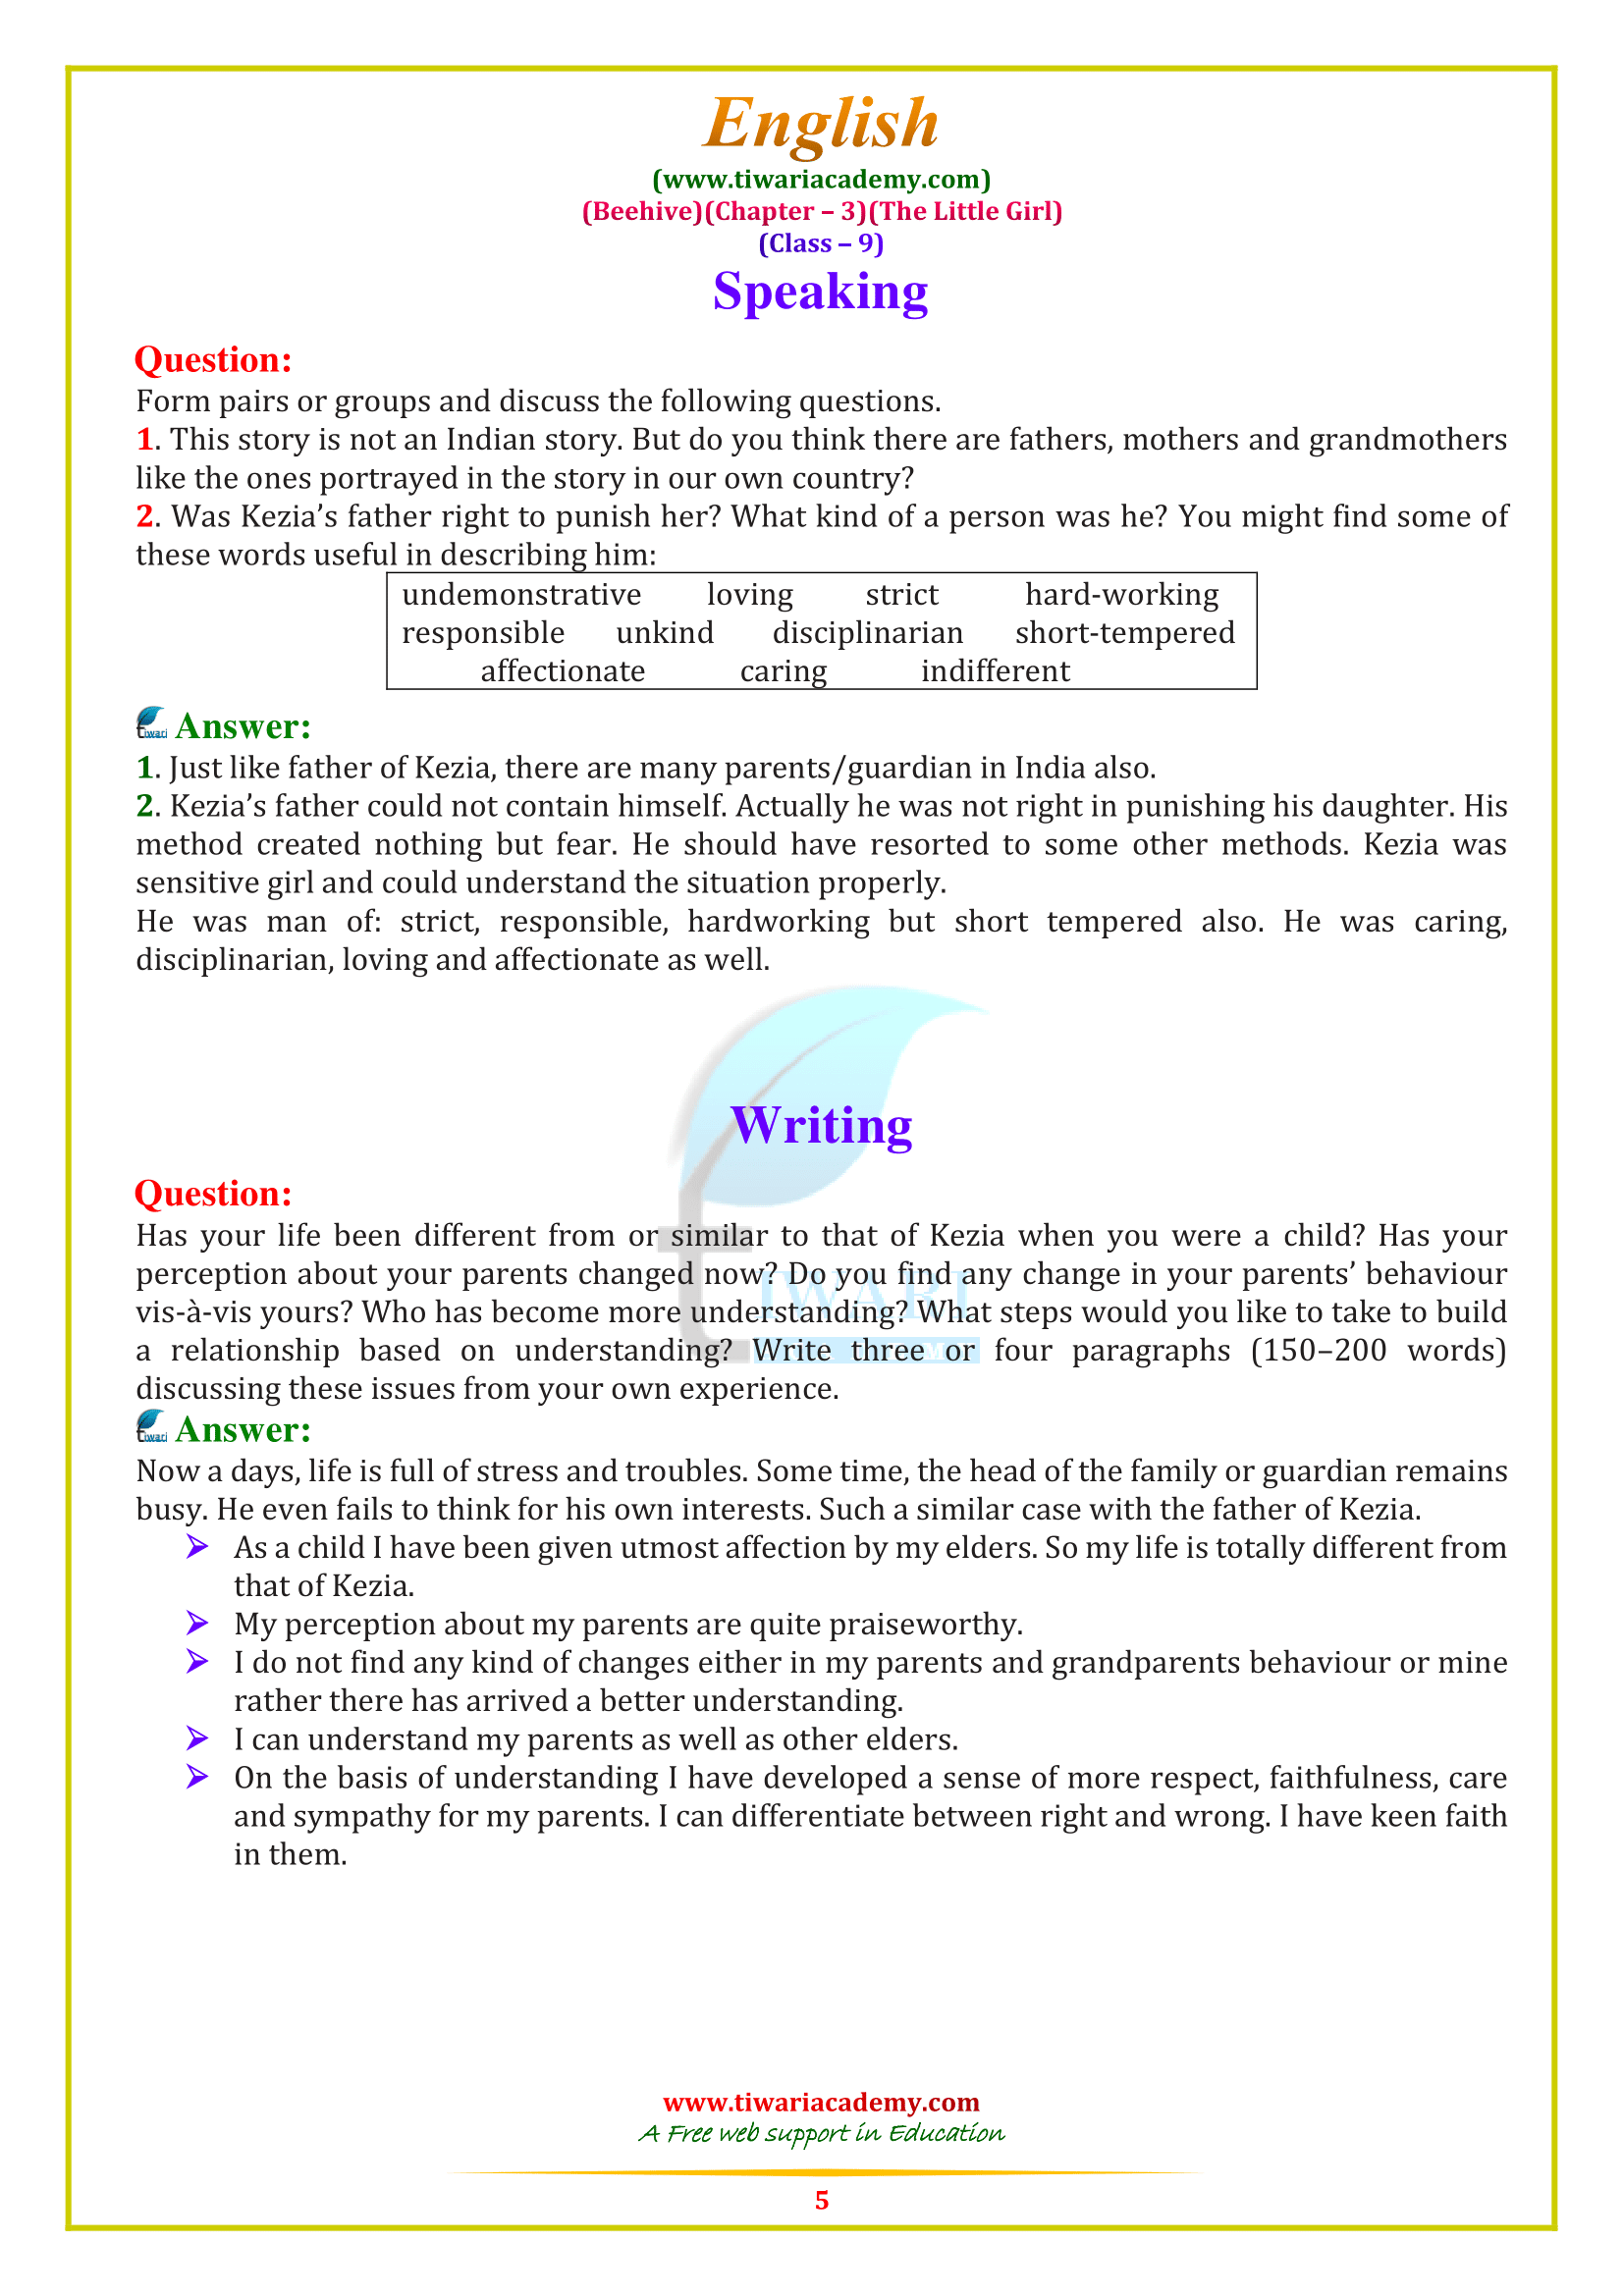 NCERT Solutions for Class 9 English Beehive Chapter 3 Rain on the Roof